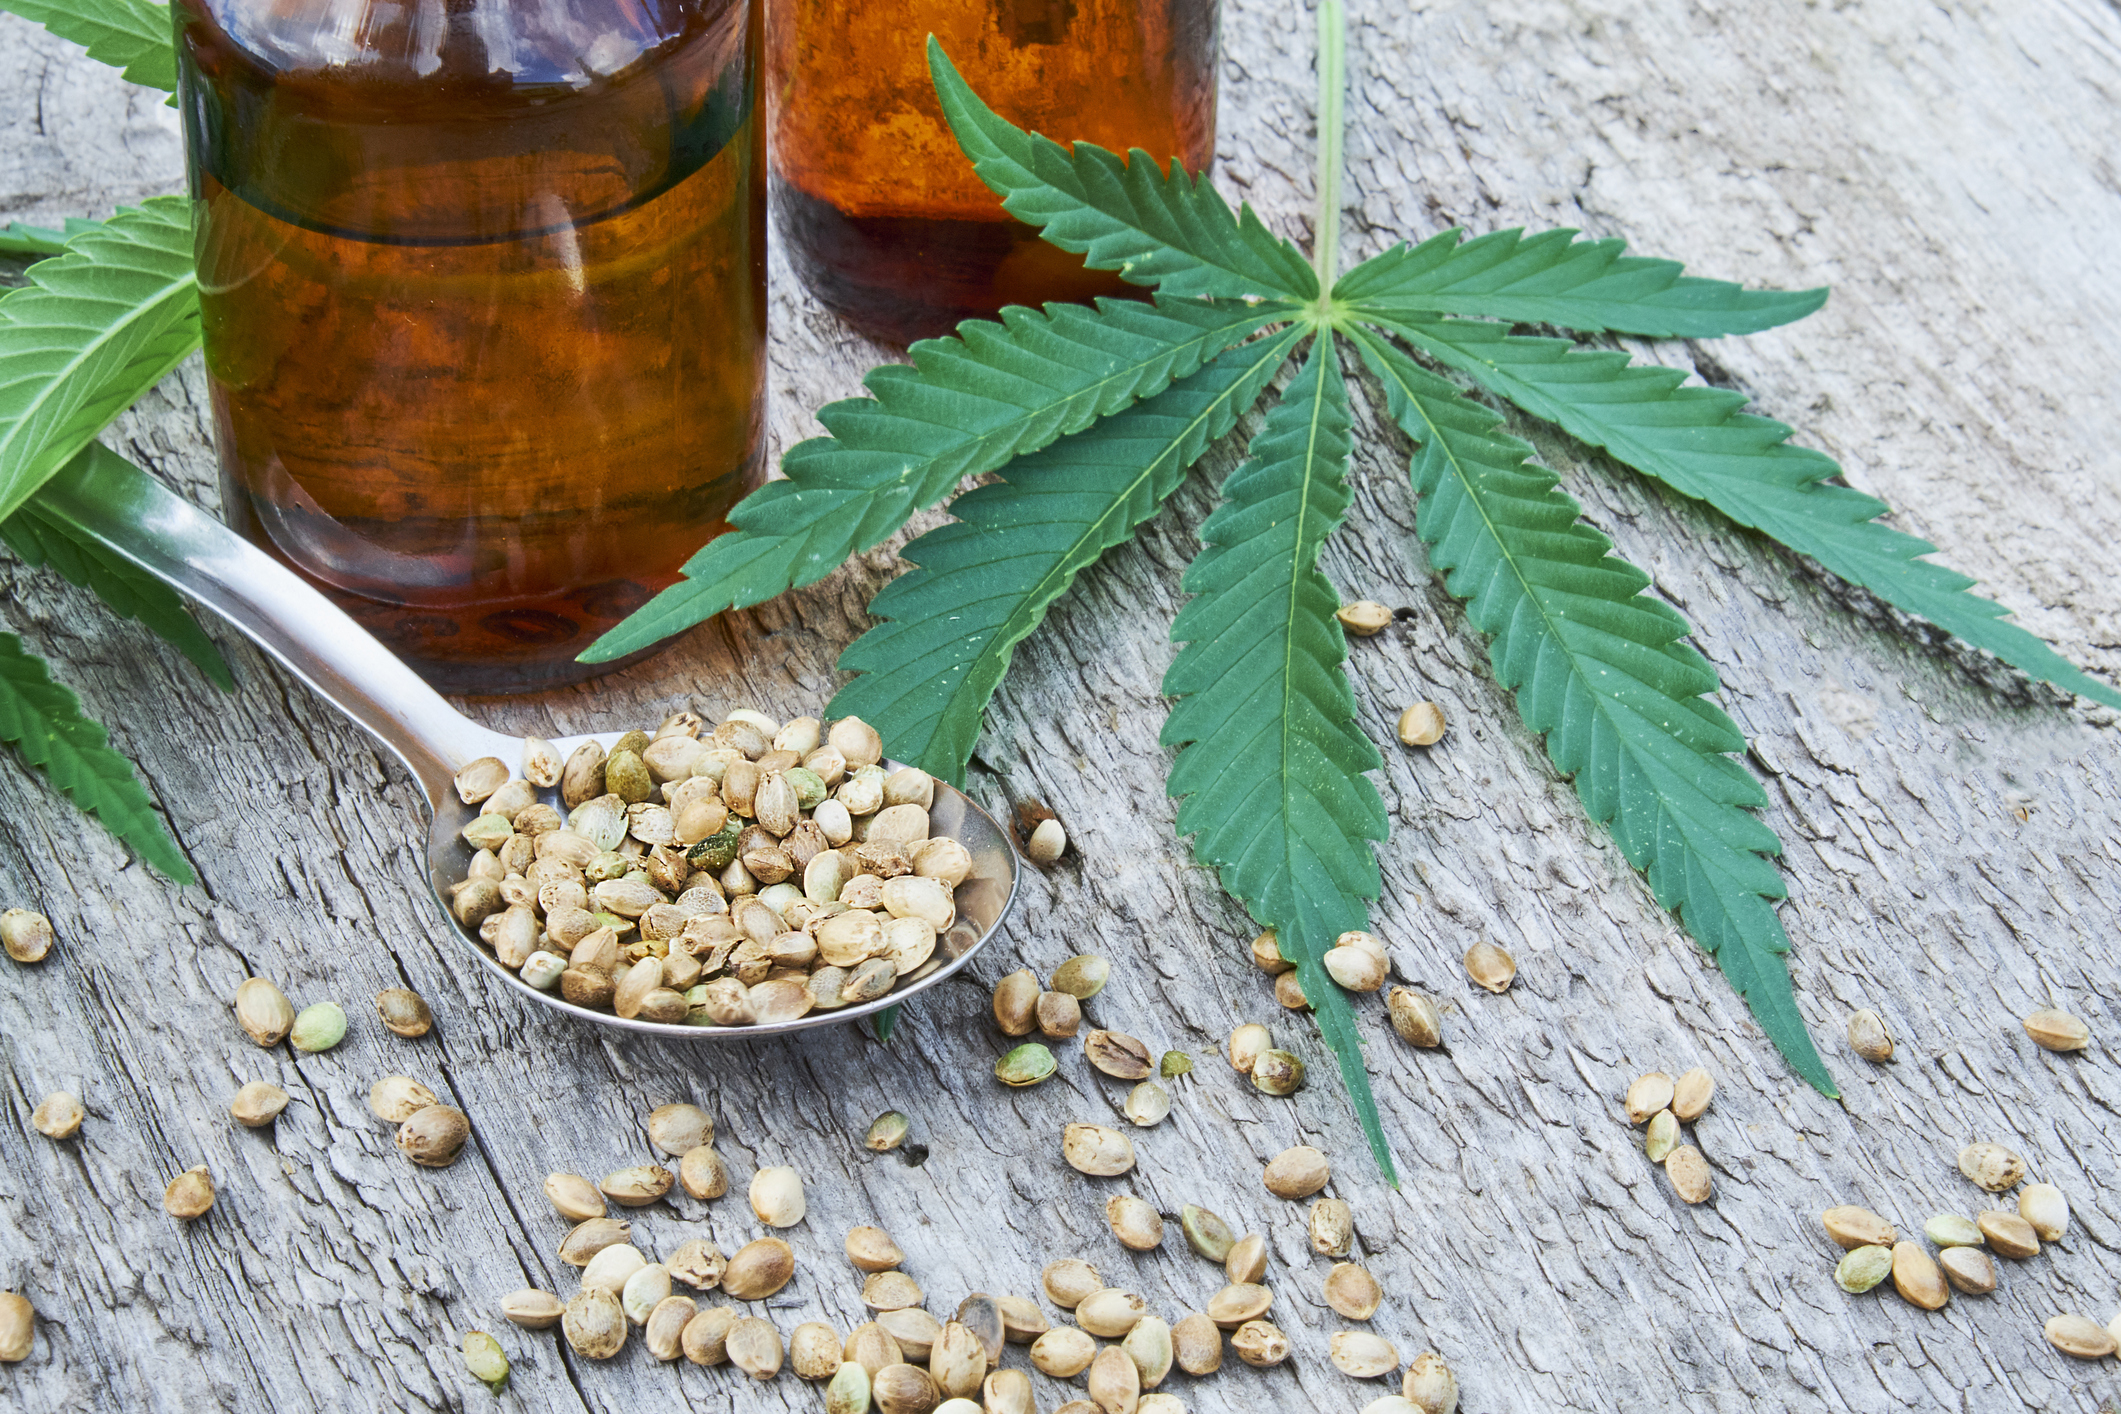 How cannabis is used to treat other addictive diseases